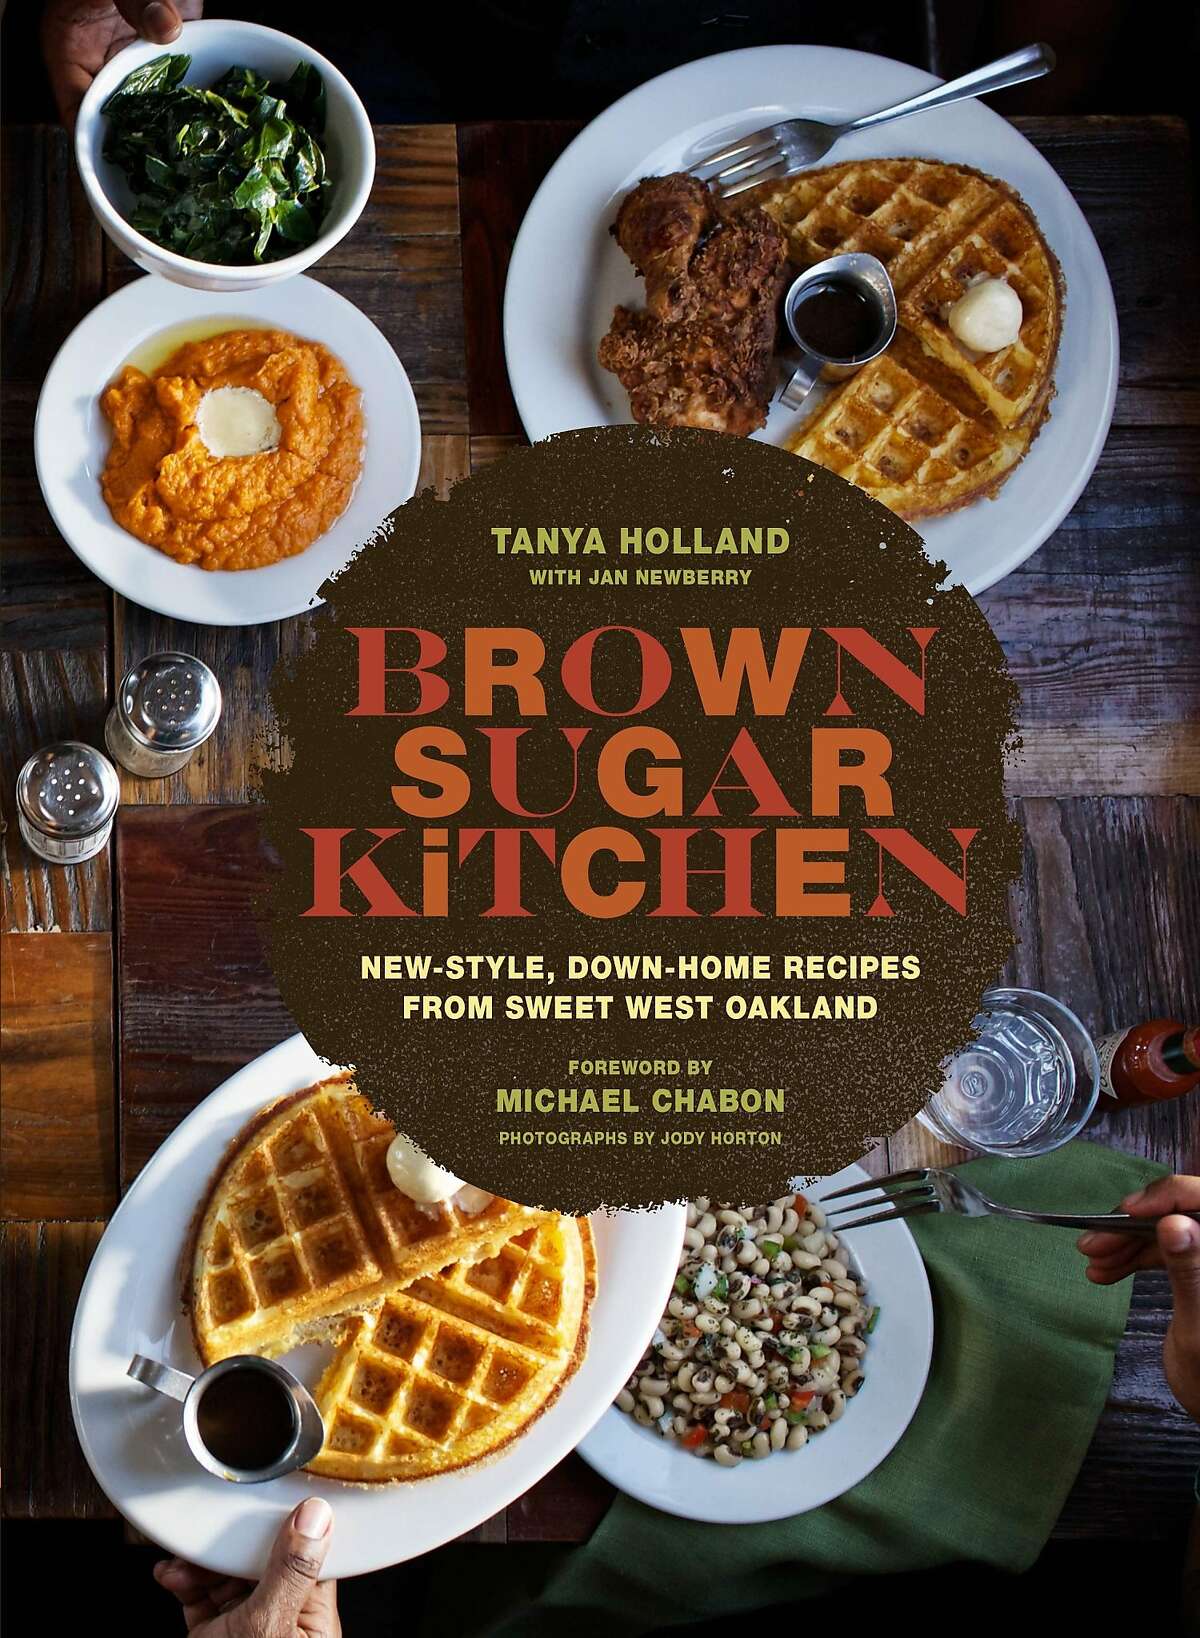 Brown Sugar Kitchen chef Tanya Holland's second book, based on stories and recipes from her award-winning restaurant, comes out Sept. 9, 2014.